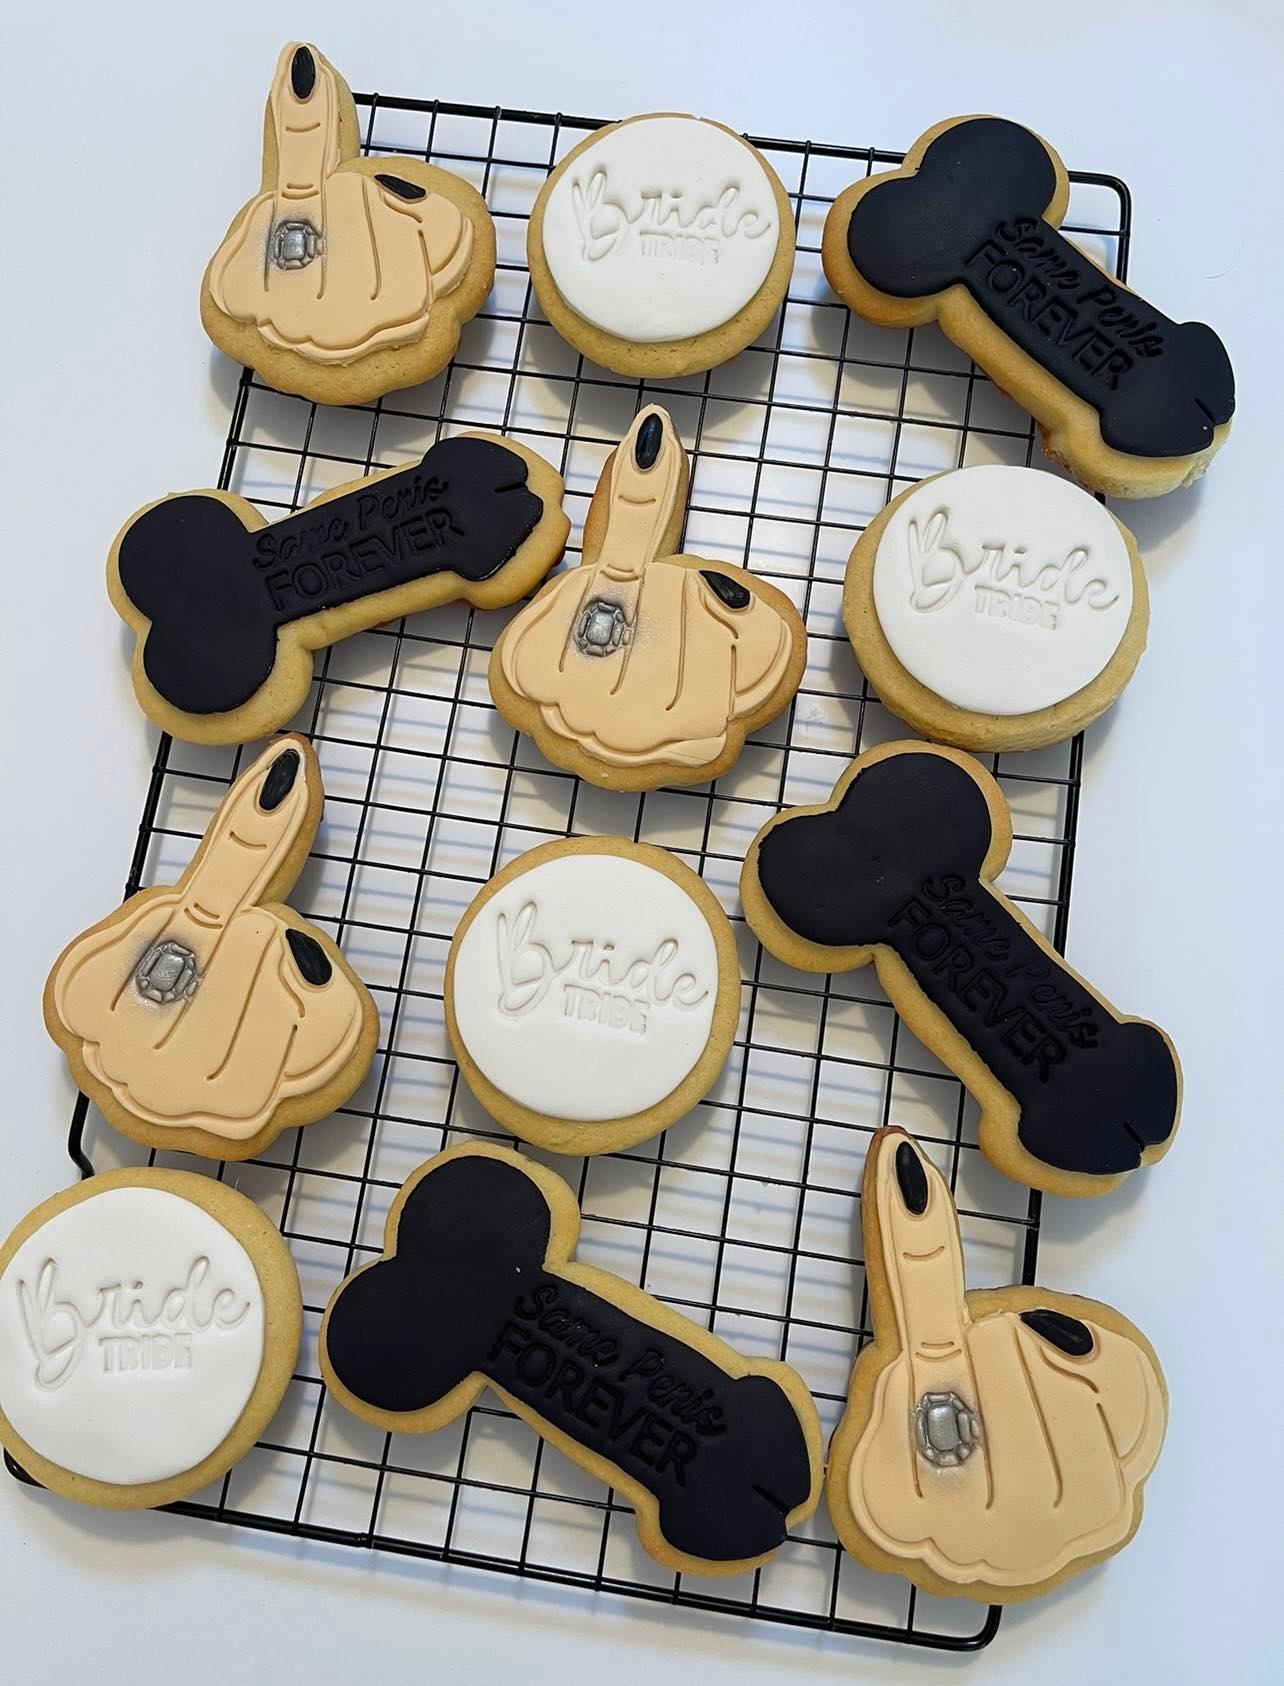 Bachelorette Party Cookie Packs